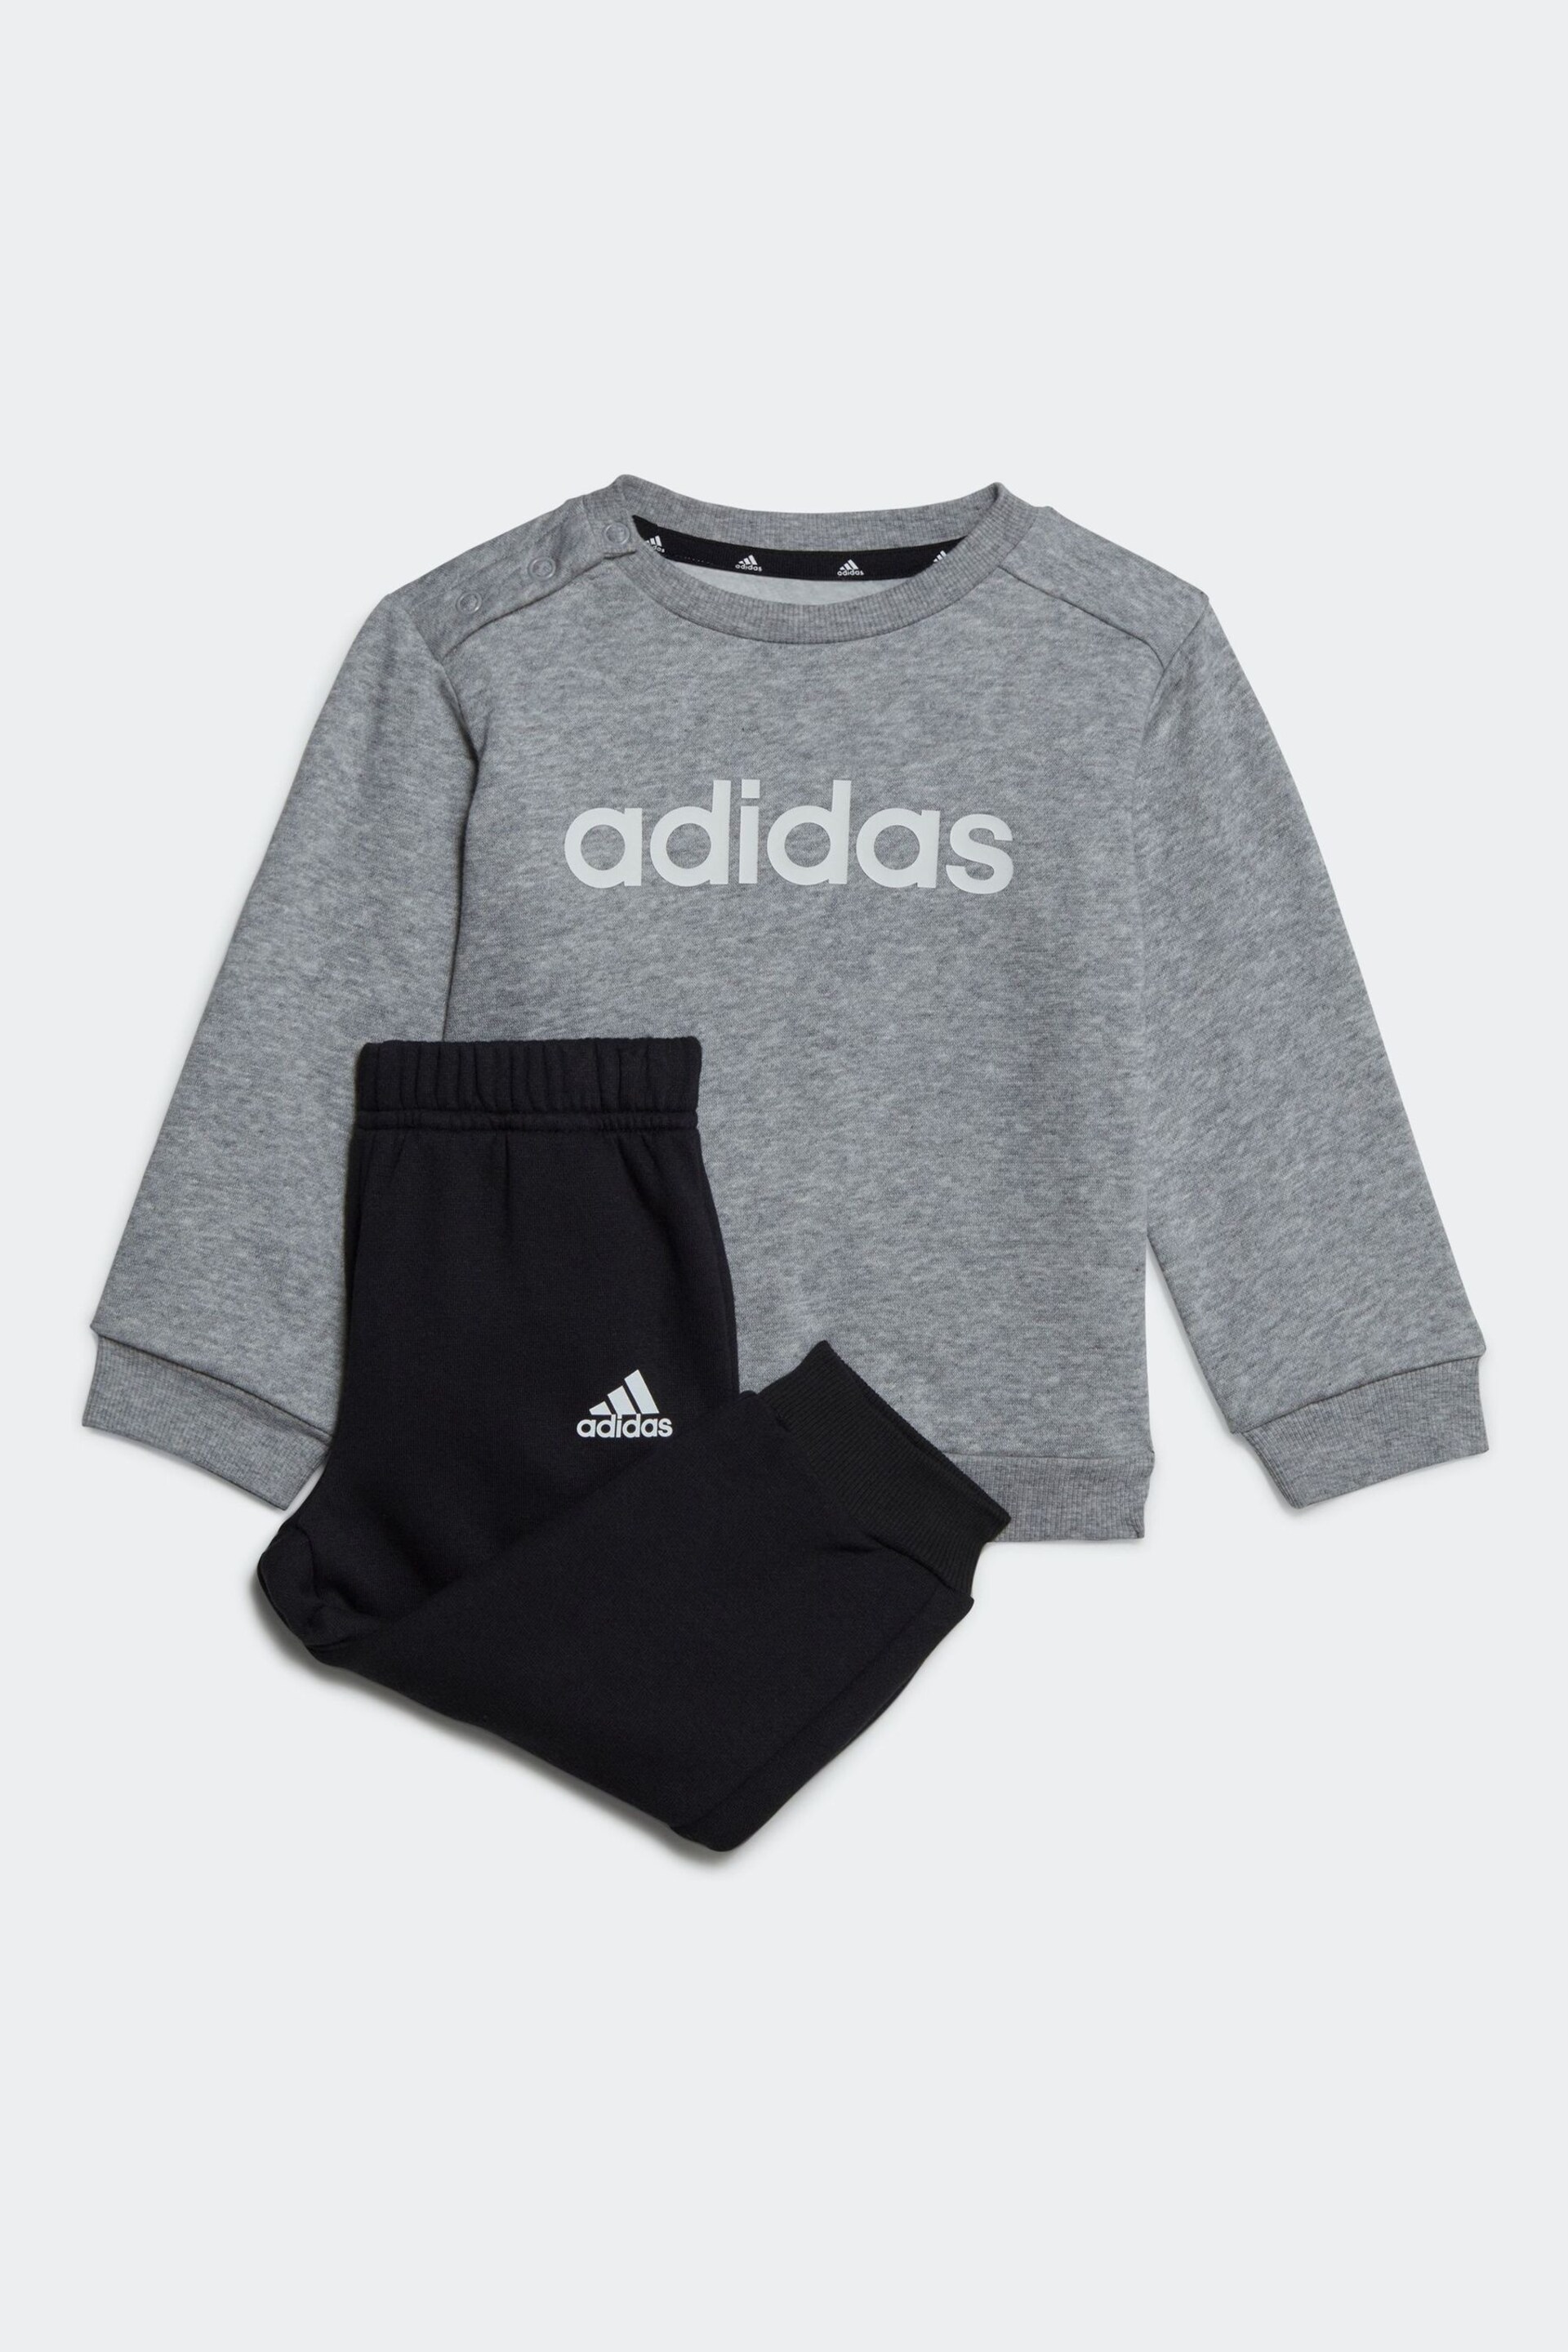 adidas Grey Infant Sportswear Essentials Lineage Joggers Set - Image 1 of 4